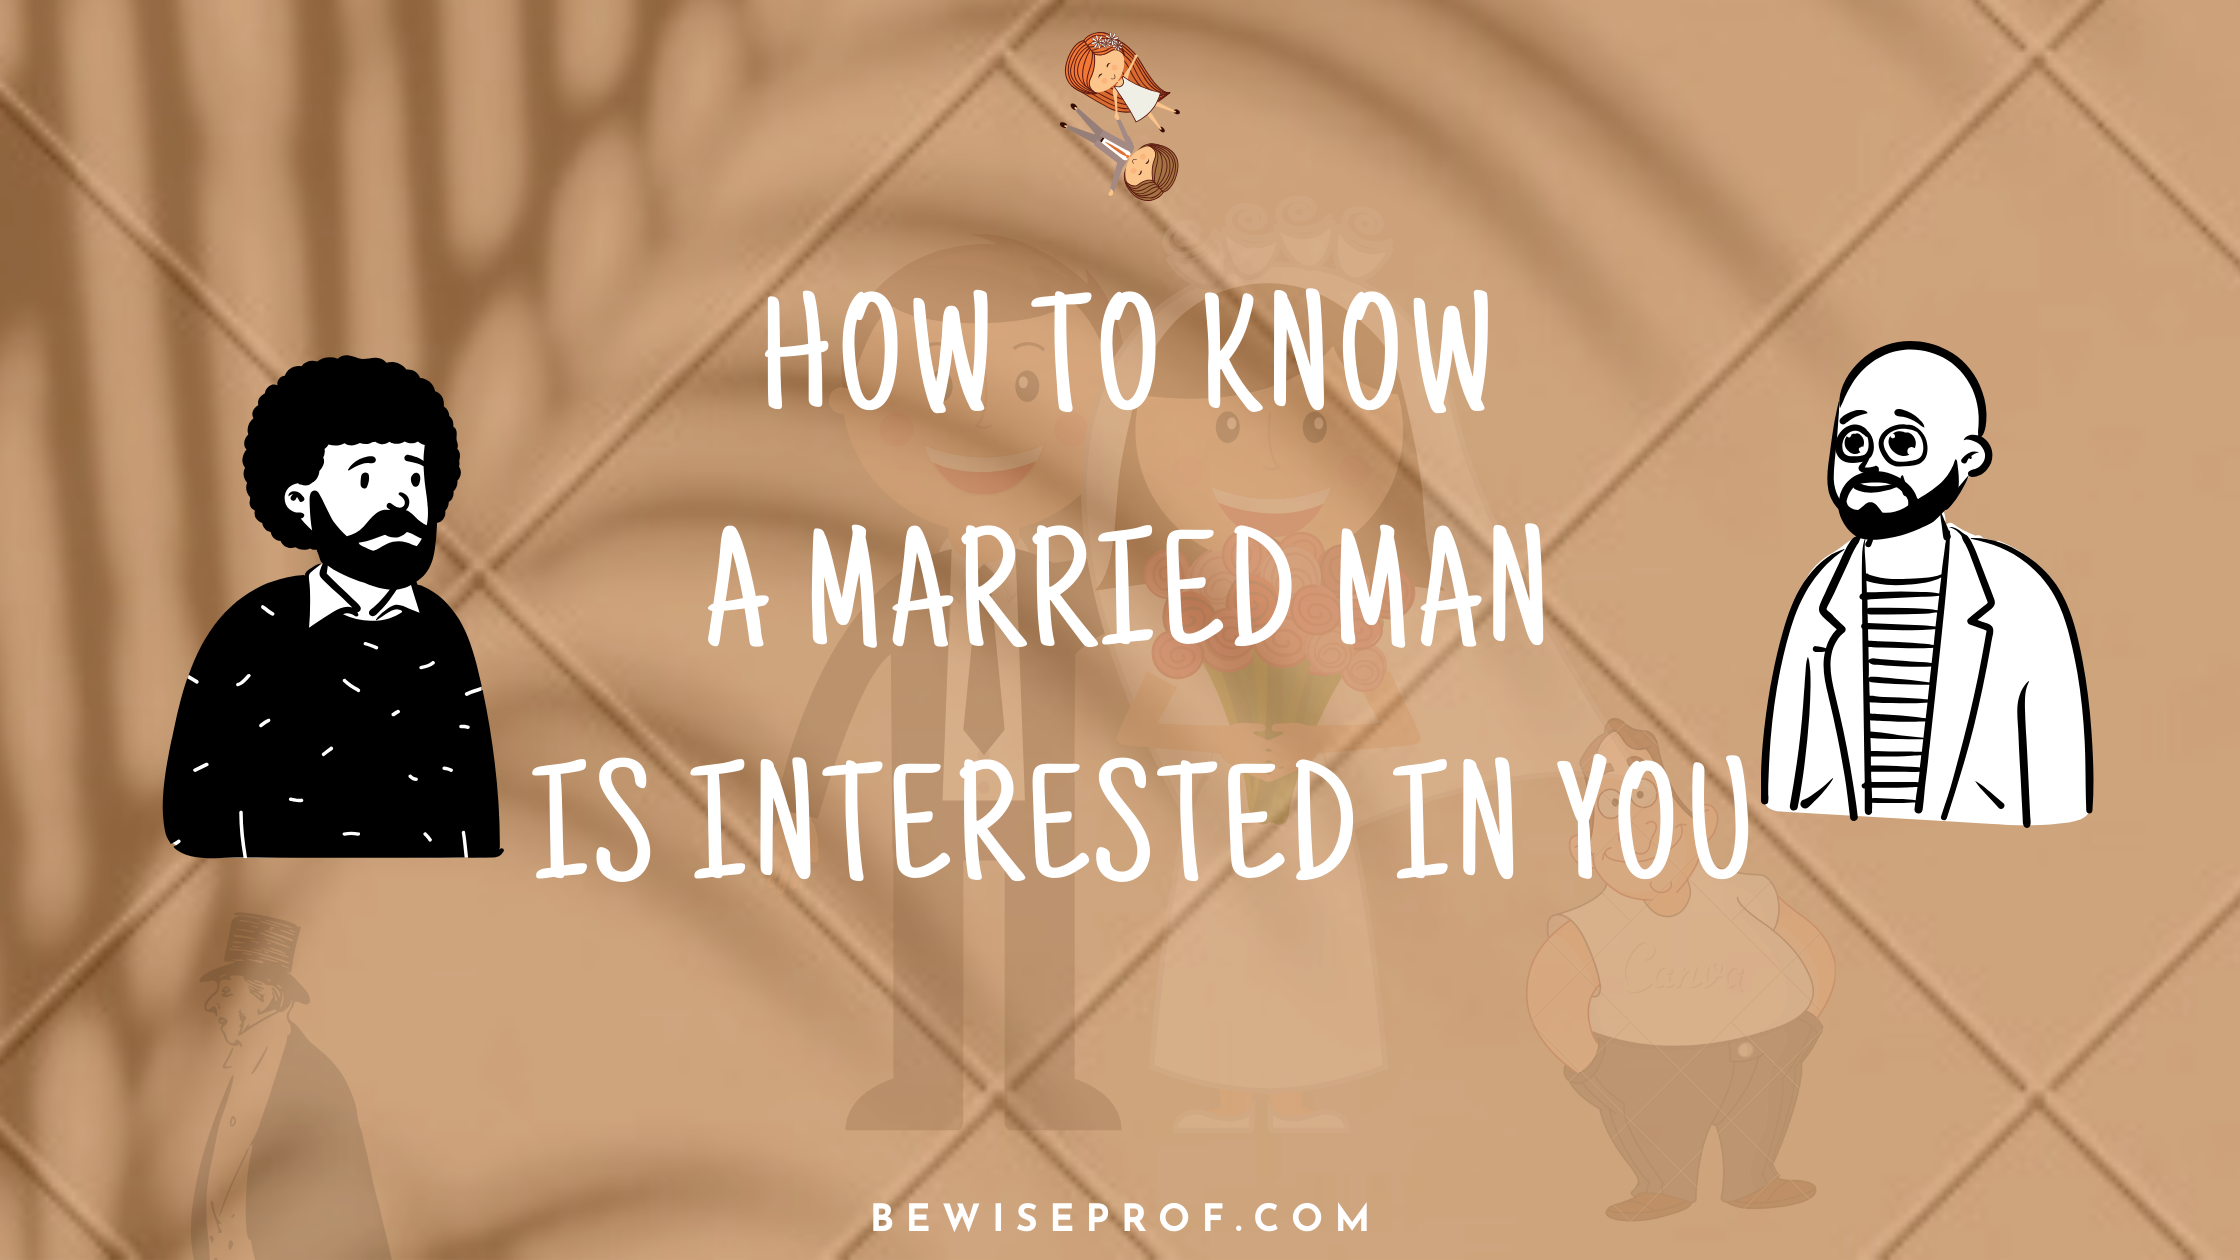 How To Know A Married Man Is Interested In You